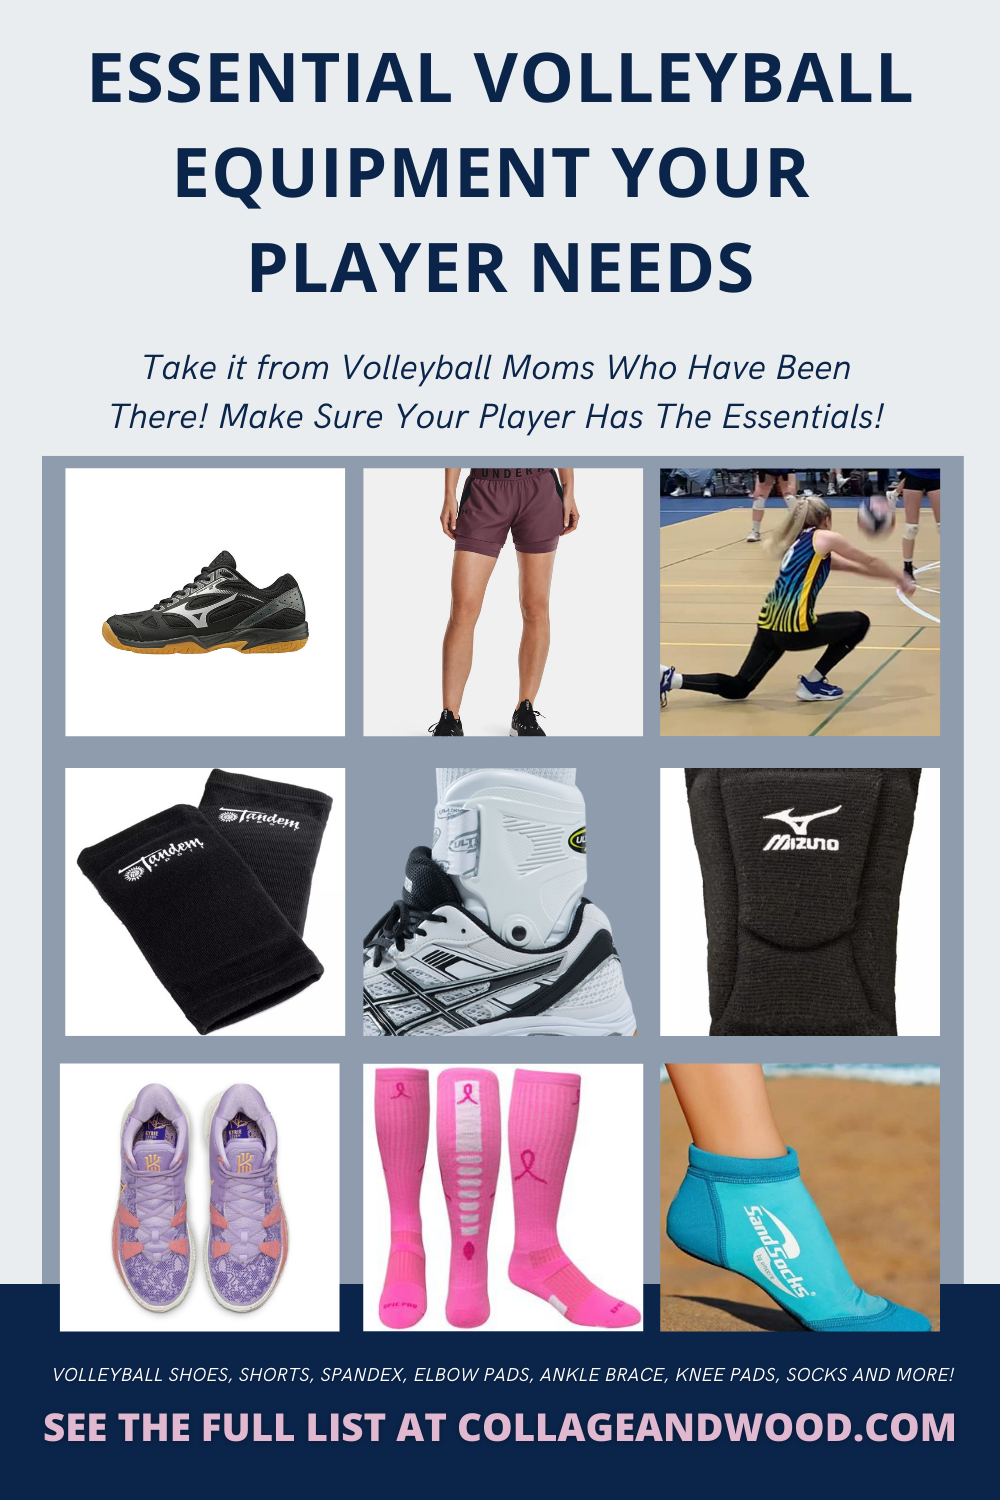 We're going of all of the essential volleyball equipment your player needs for a successful volleyball season.